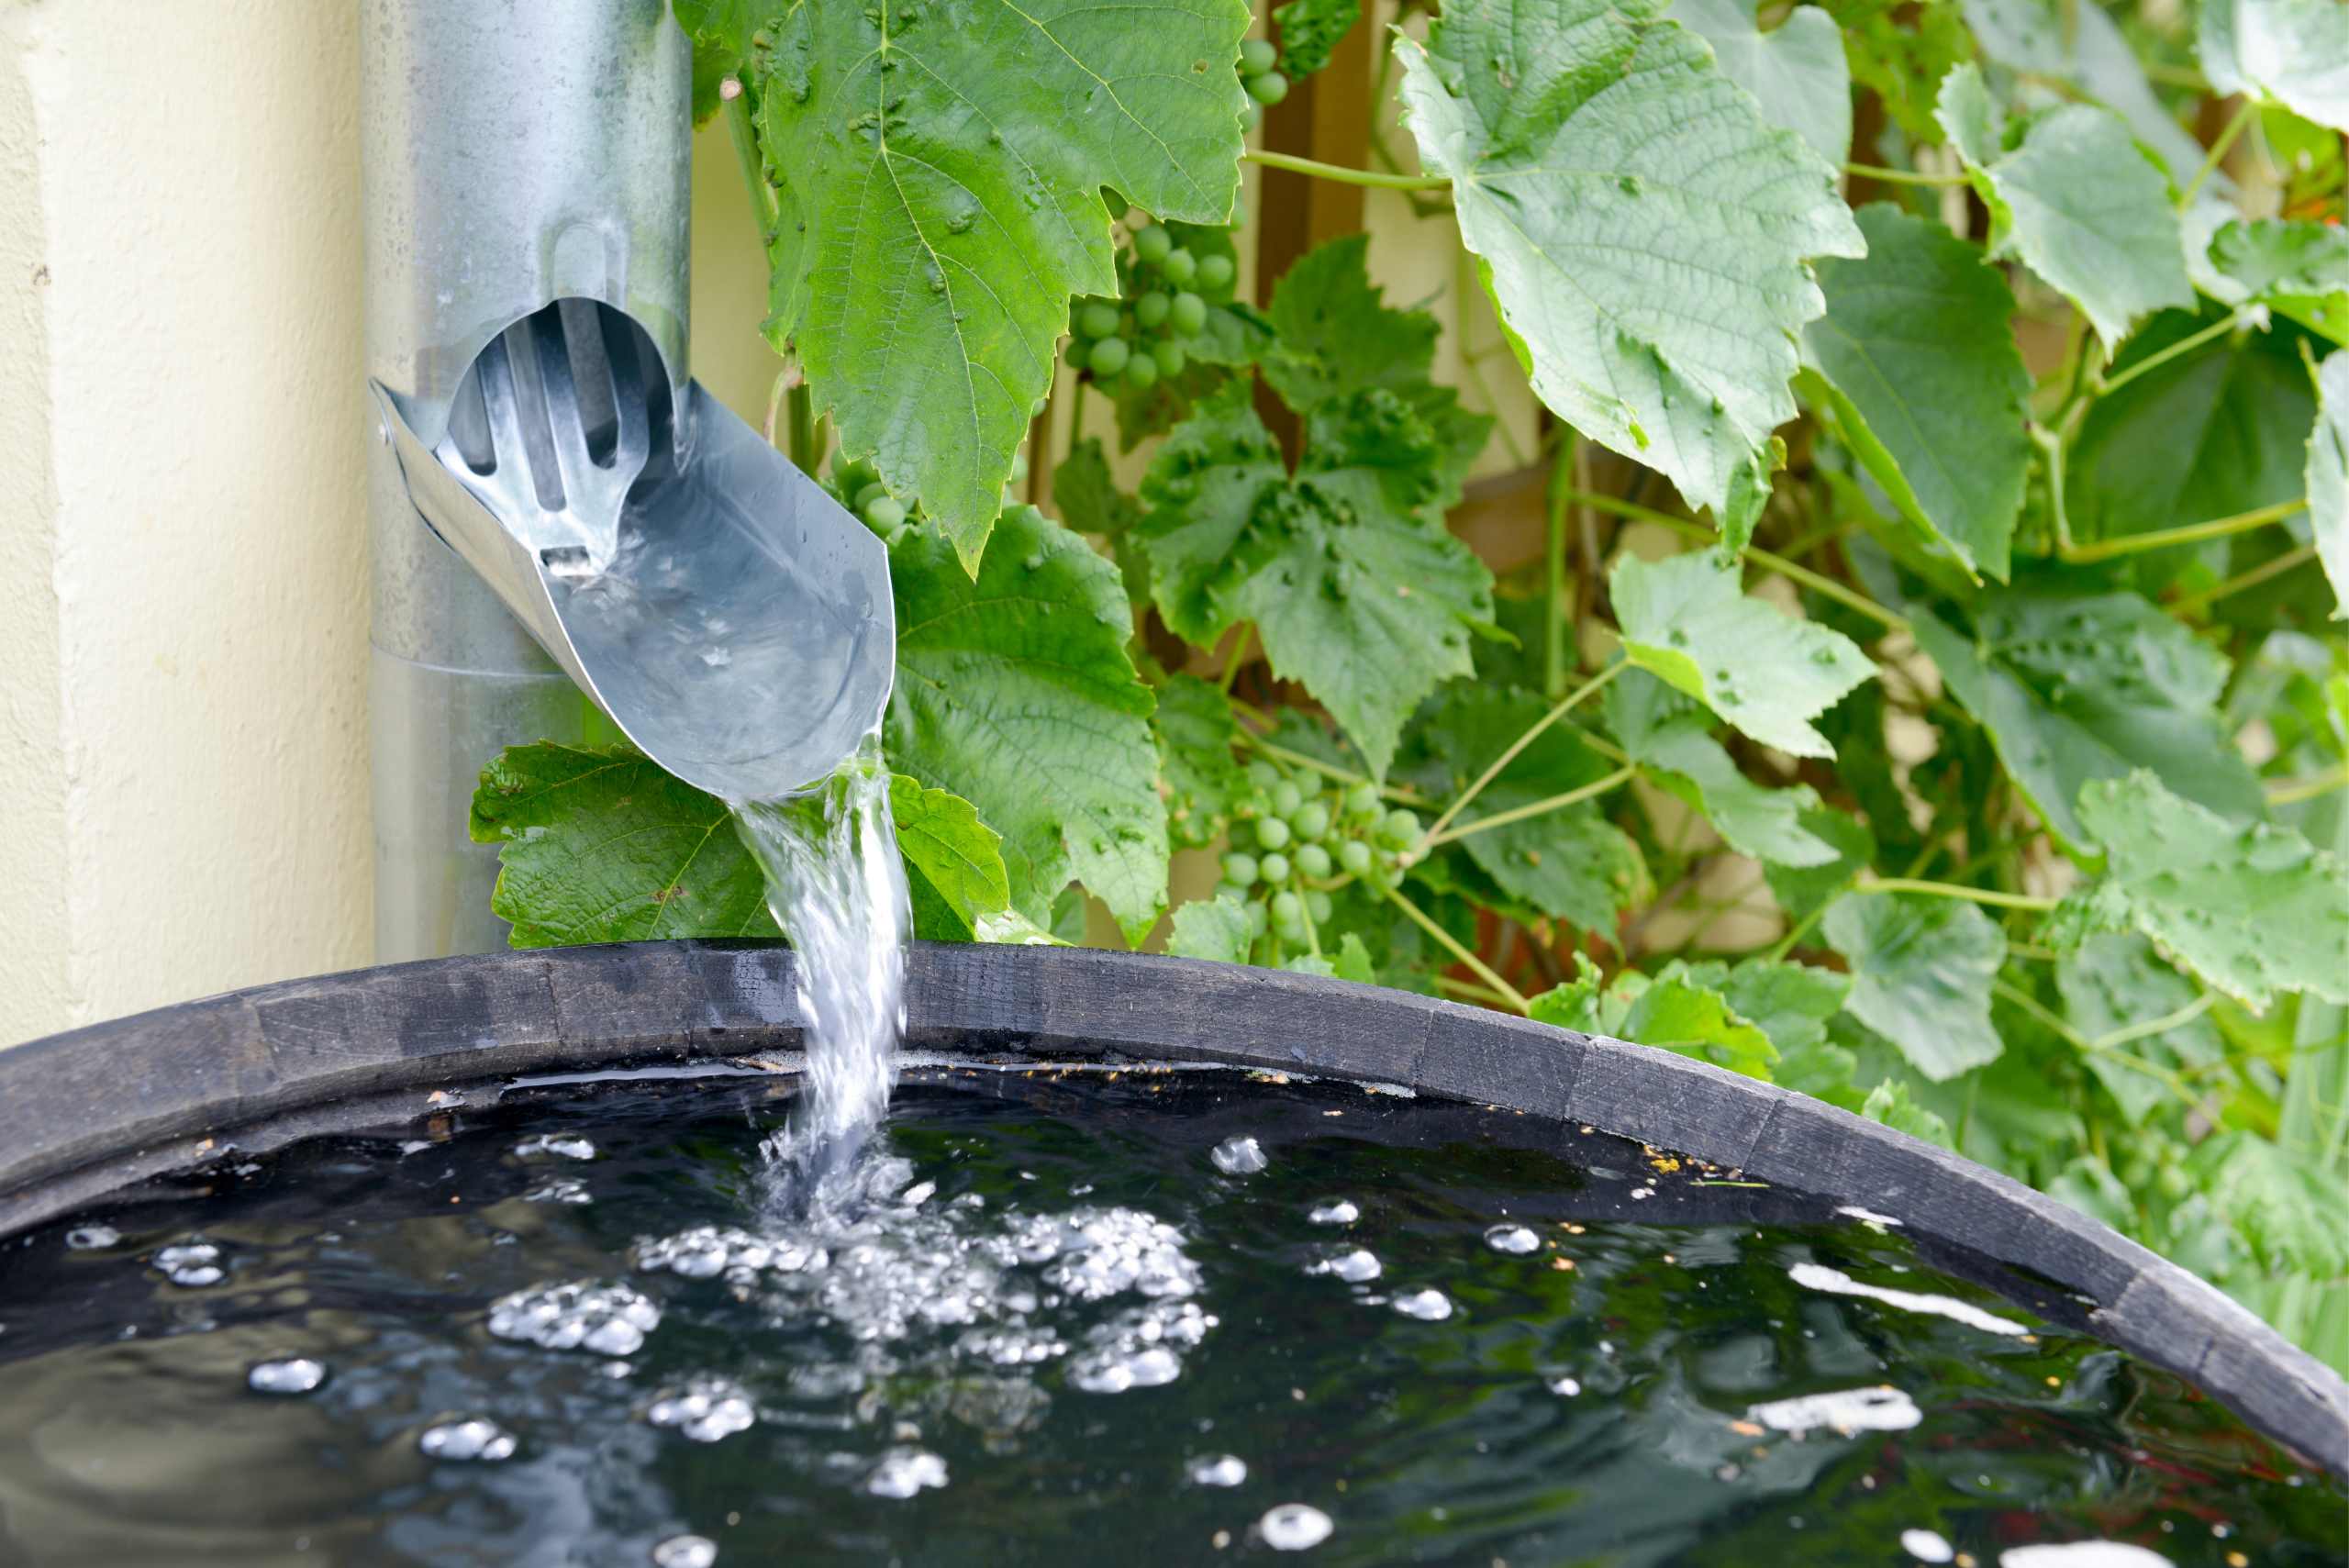 Water flowing into a rain barrel system for collection water.